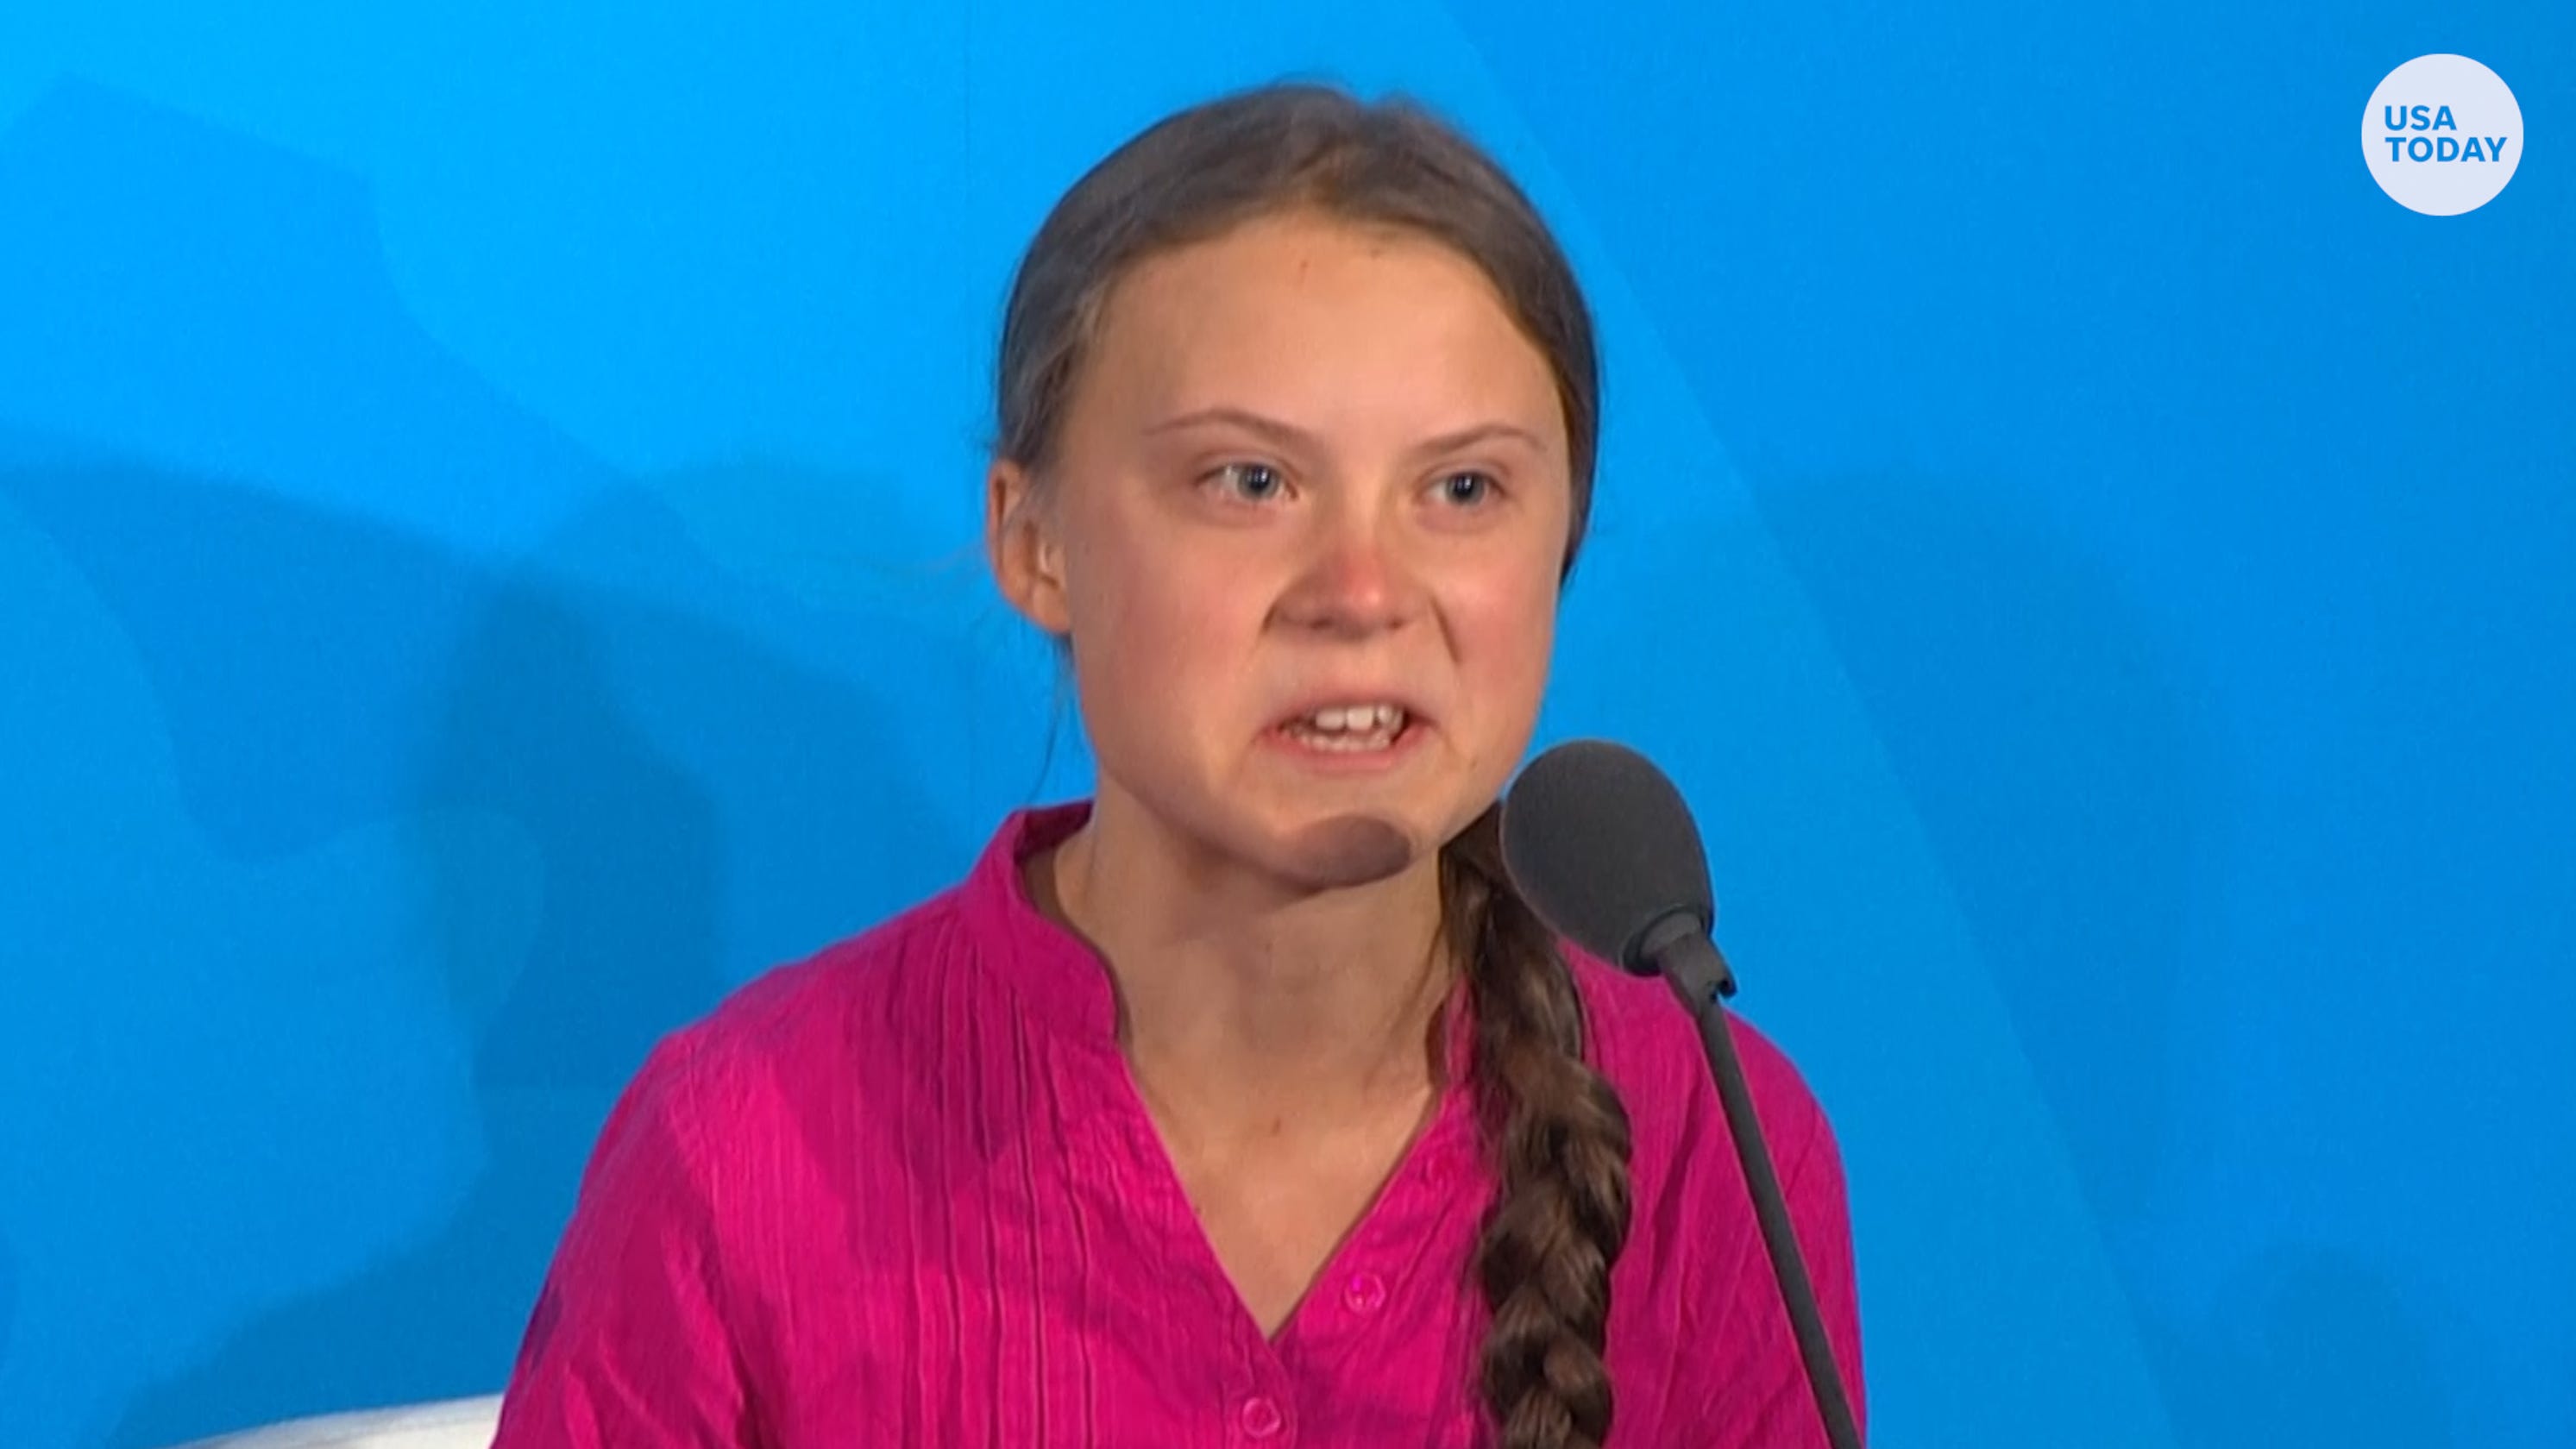 Climate change activist Greta Thunberg is making grown-ups (and Trump) squirm. Good - USA TODAY